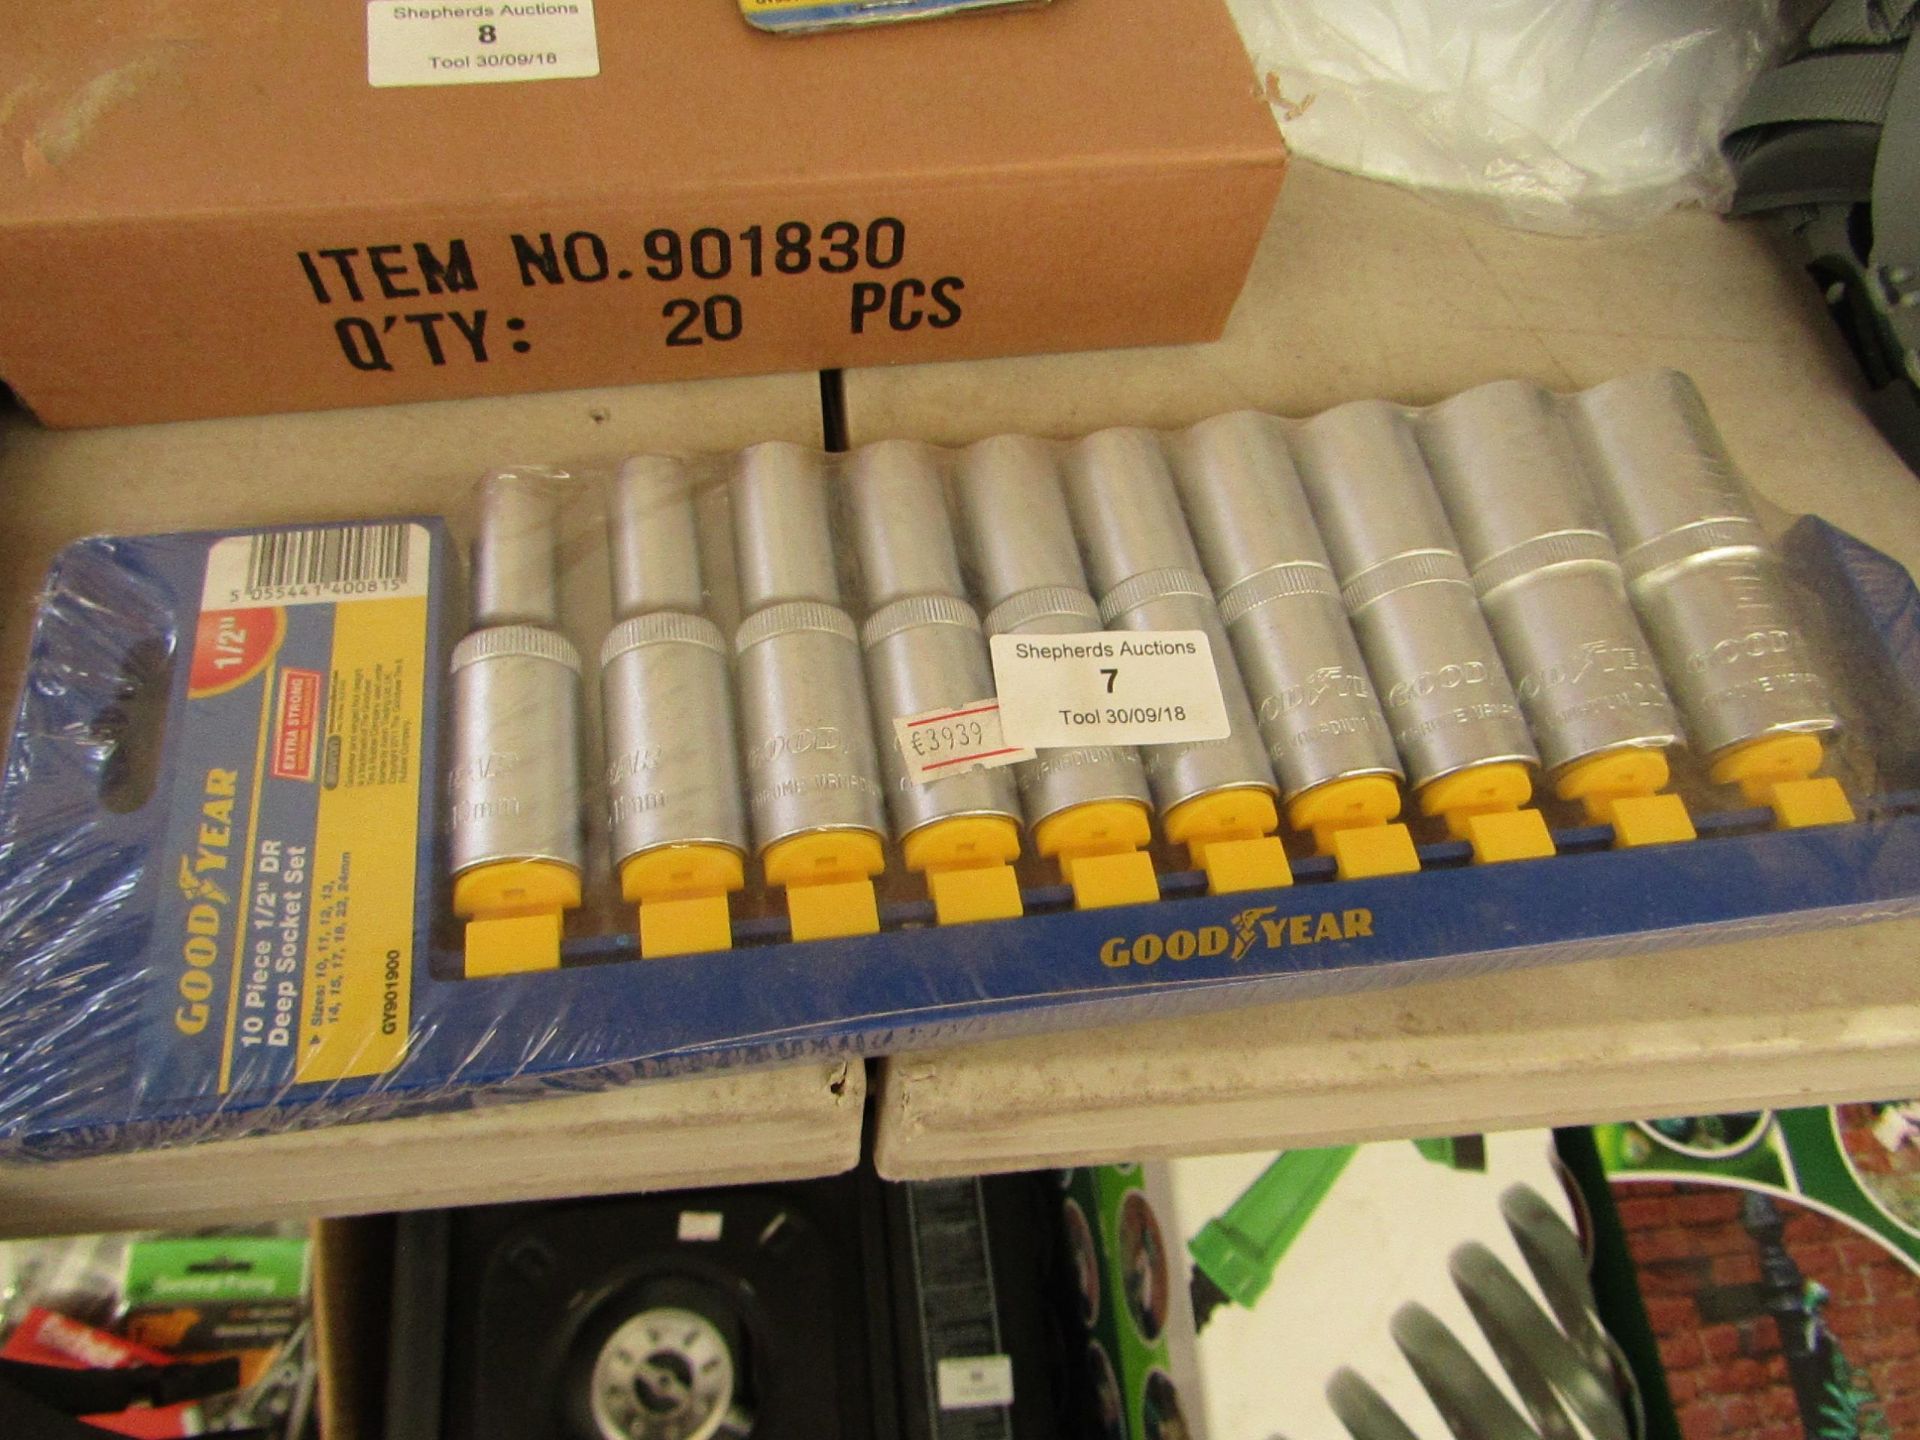 Good Year 10 piece 1/2" DR deep socket kit, new and factory sealed.